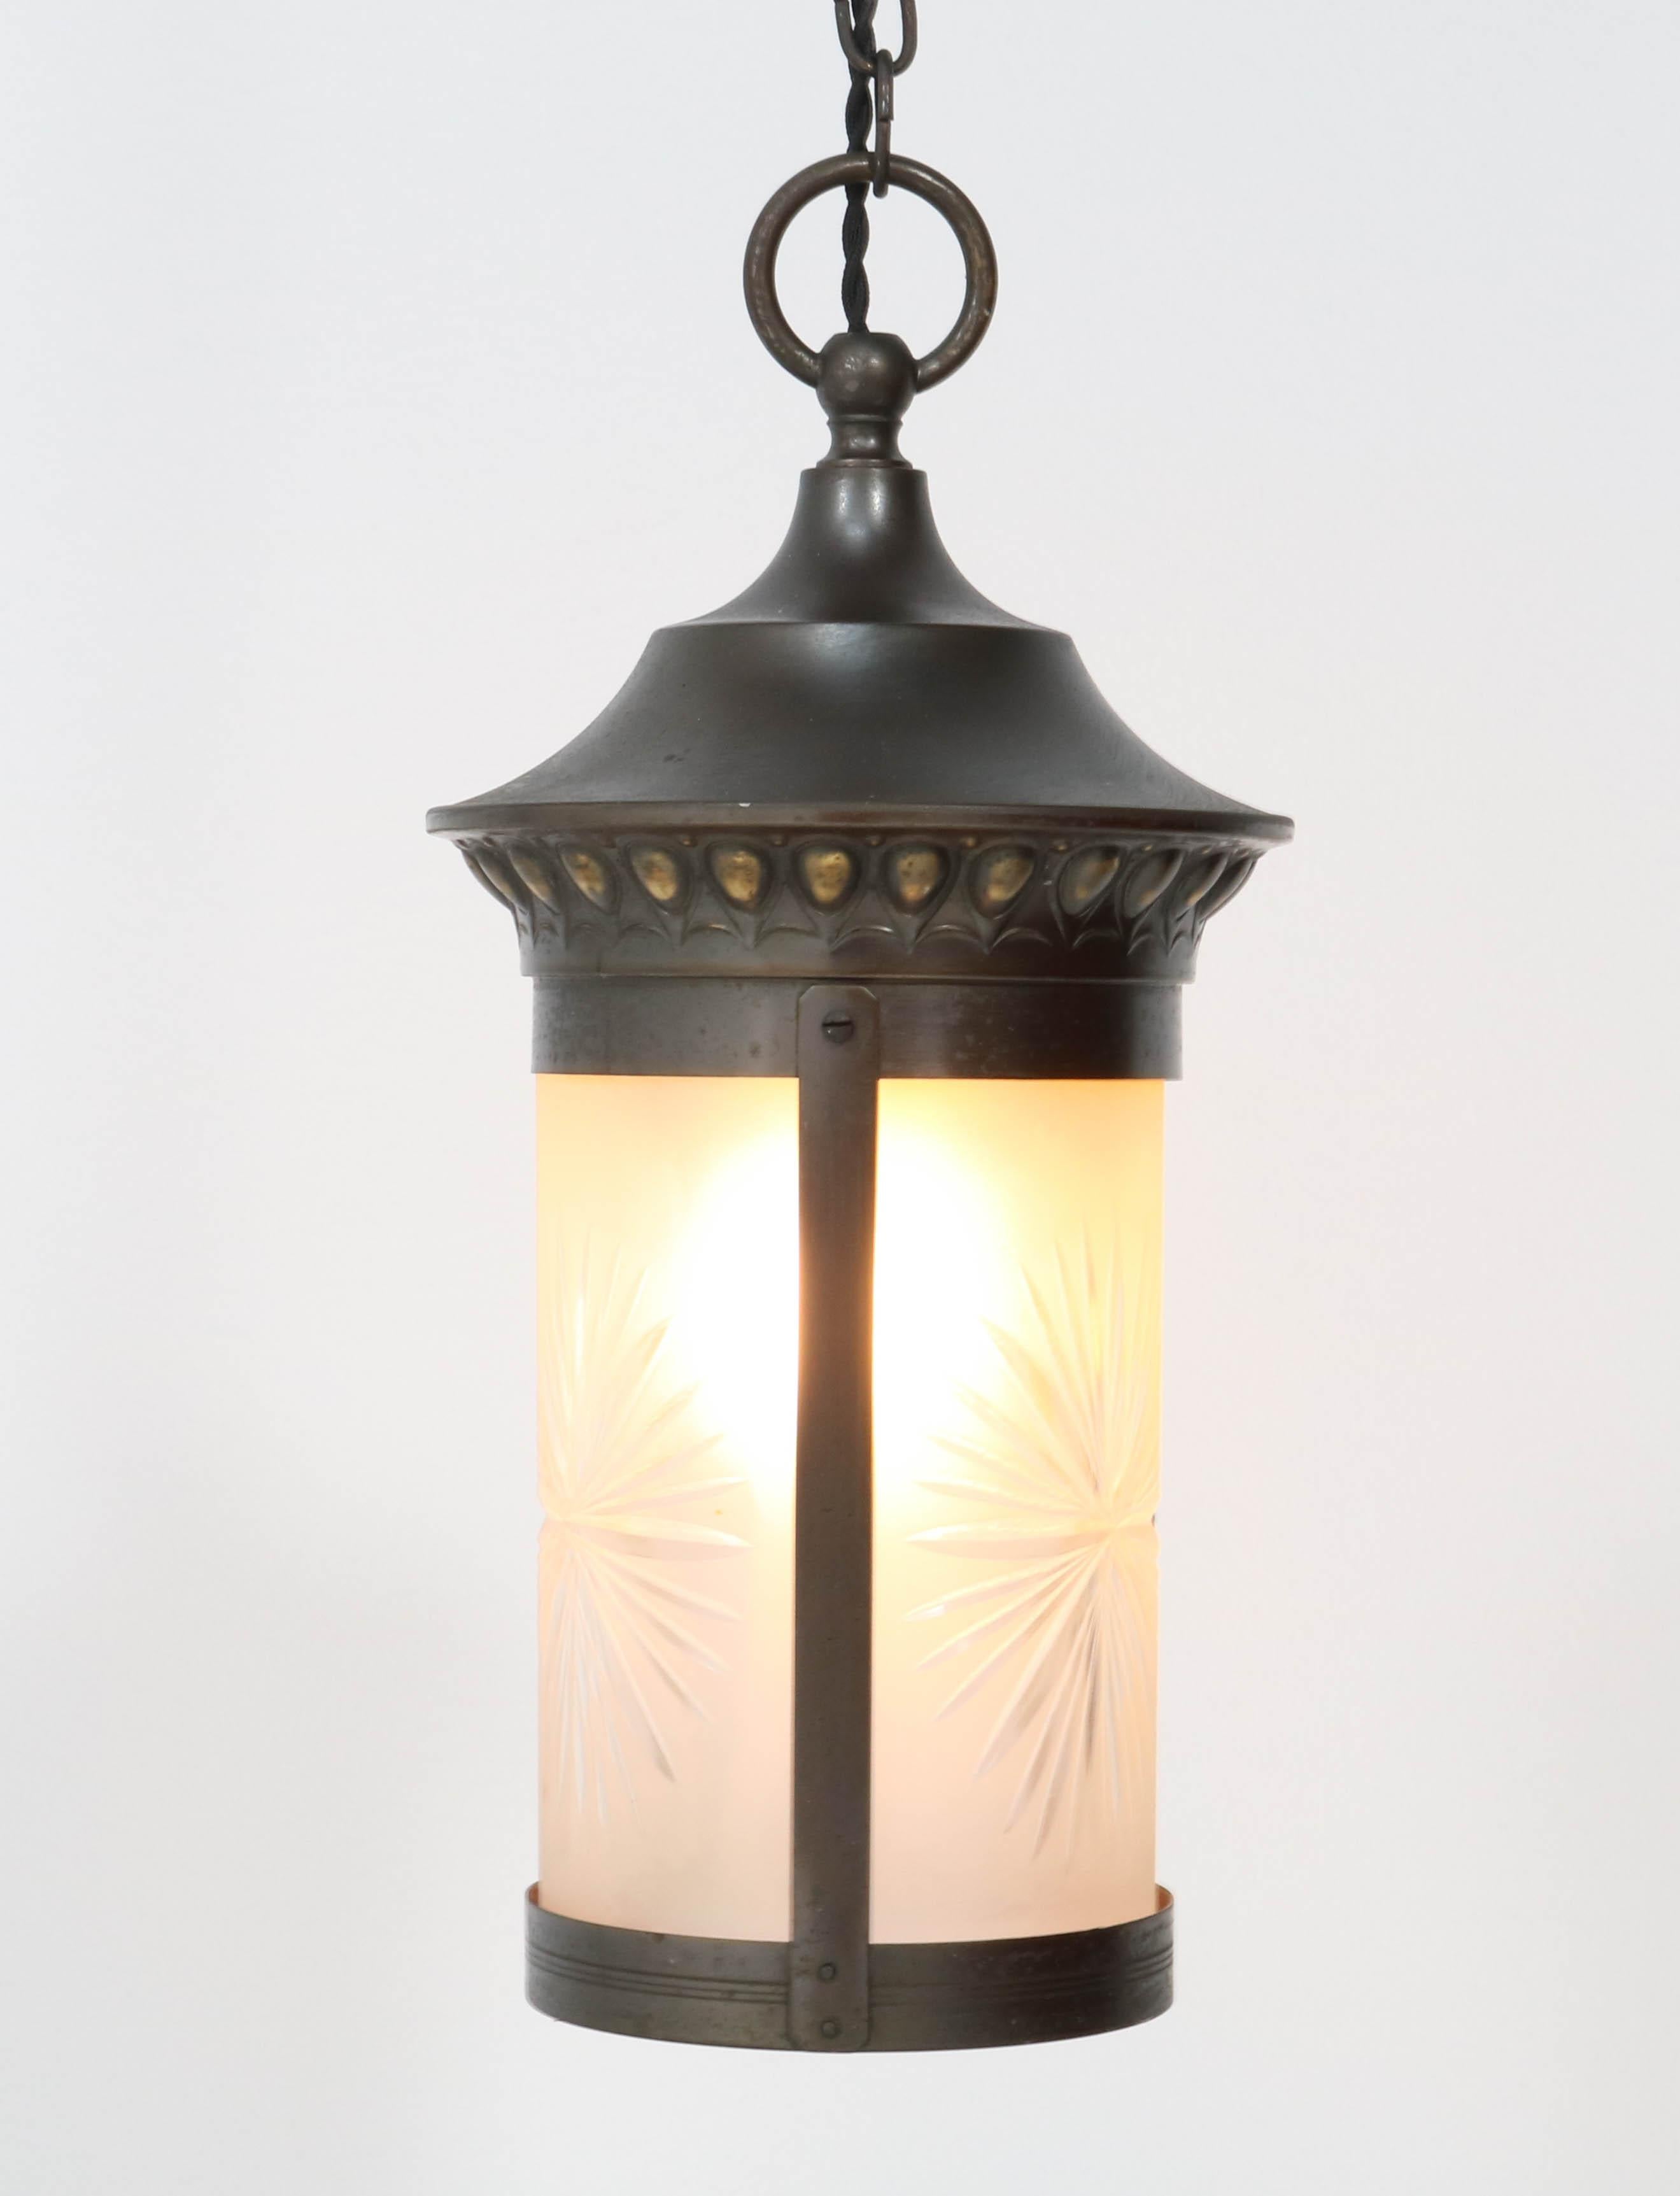 Patinated Brass Art Nouveau Lantern with Etched Glass, 1900s For Sale 6